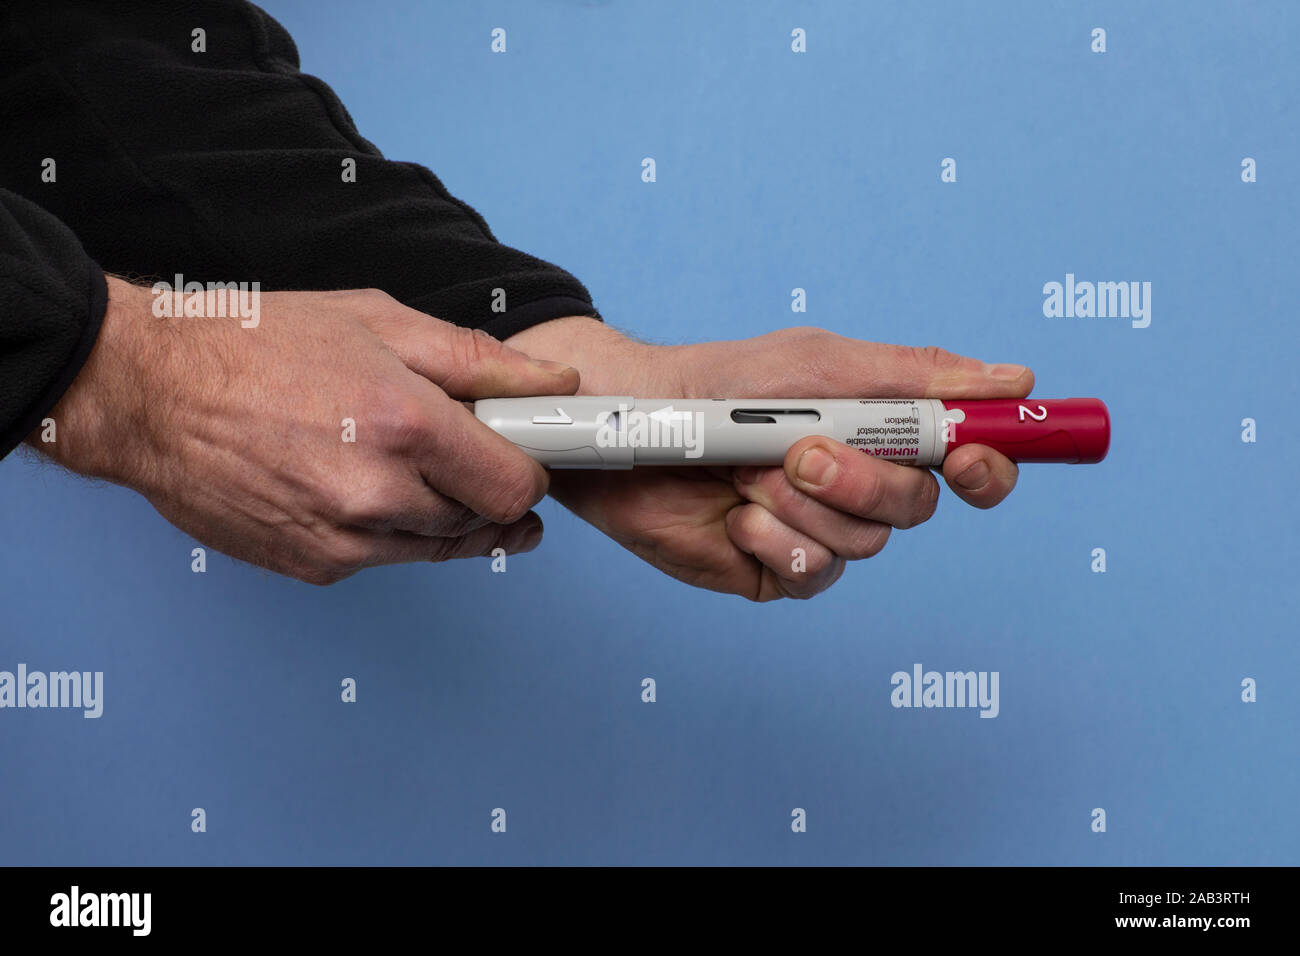 Eindhoven, the Netherlands, 12th November 2019. Humira, adalimumab. A male hand preparing a pen with a needle for a patient to inject themselves with Stock Photo